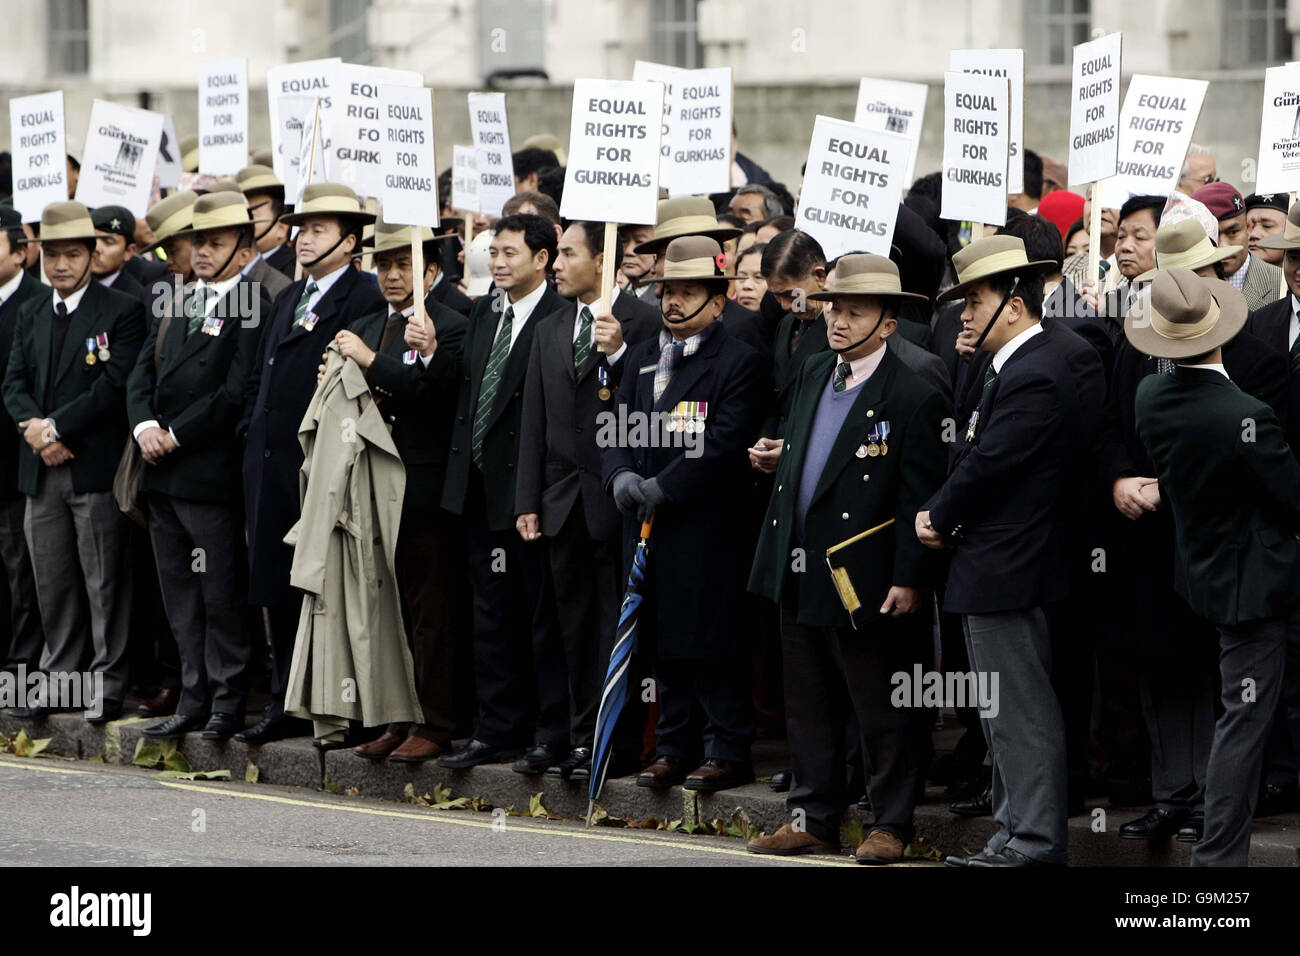 Gurkhas gather outside Downing Street, London, where they will demand equal rights. Stock Photo